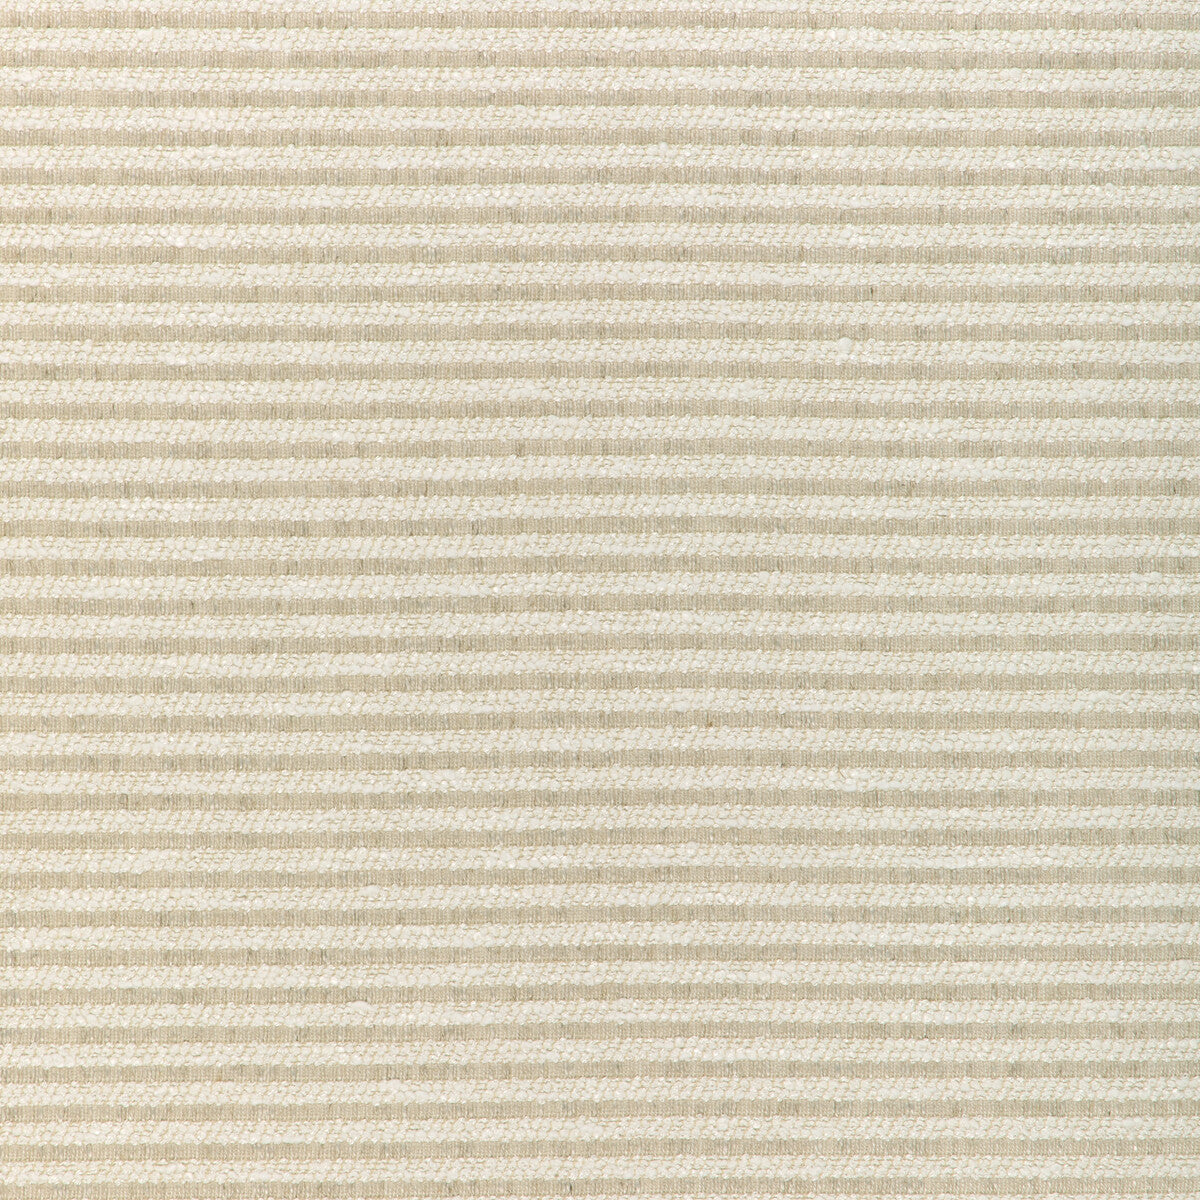 Plushy Stripe fabric in flax color - pattern 36859.116.0 - by Kravet Couture in the Atelier Weaves collection